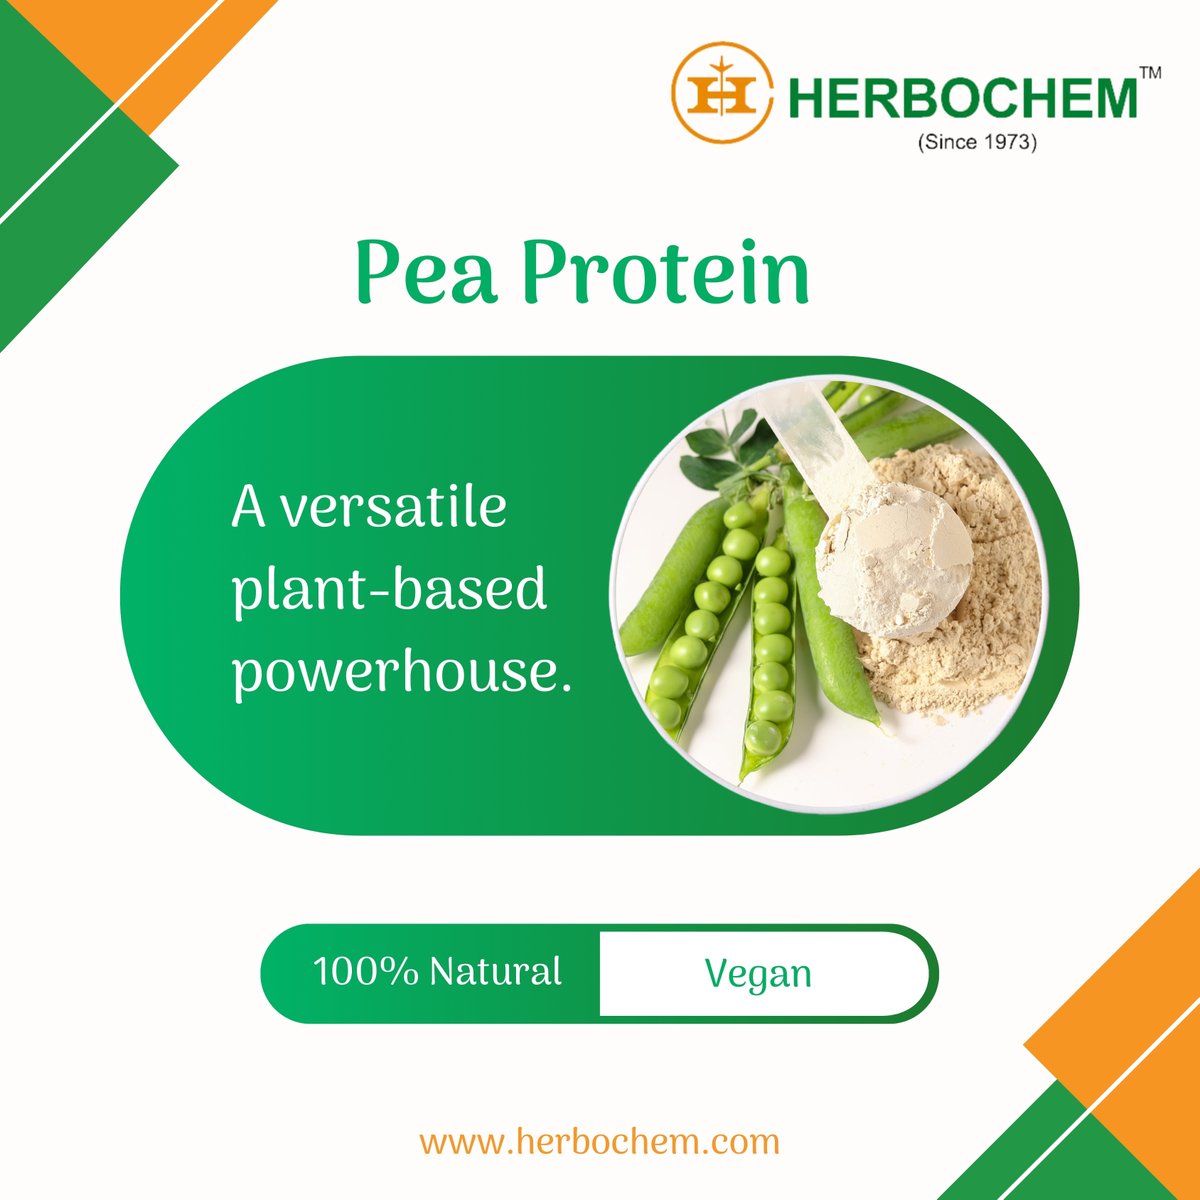 Discover the power of pea protein, a natural plant-based source packed with essential amino acids.

Elevate your nutrition goals with our premium pea protein, crafted to support health and nutrition.

info@herbochem.com

#Herbochem #PeaProtein #ProteinPowder #Nutraceuticals